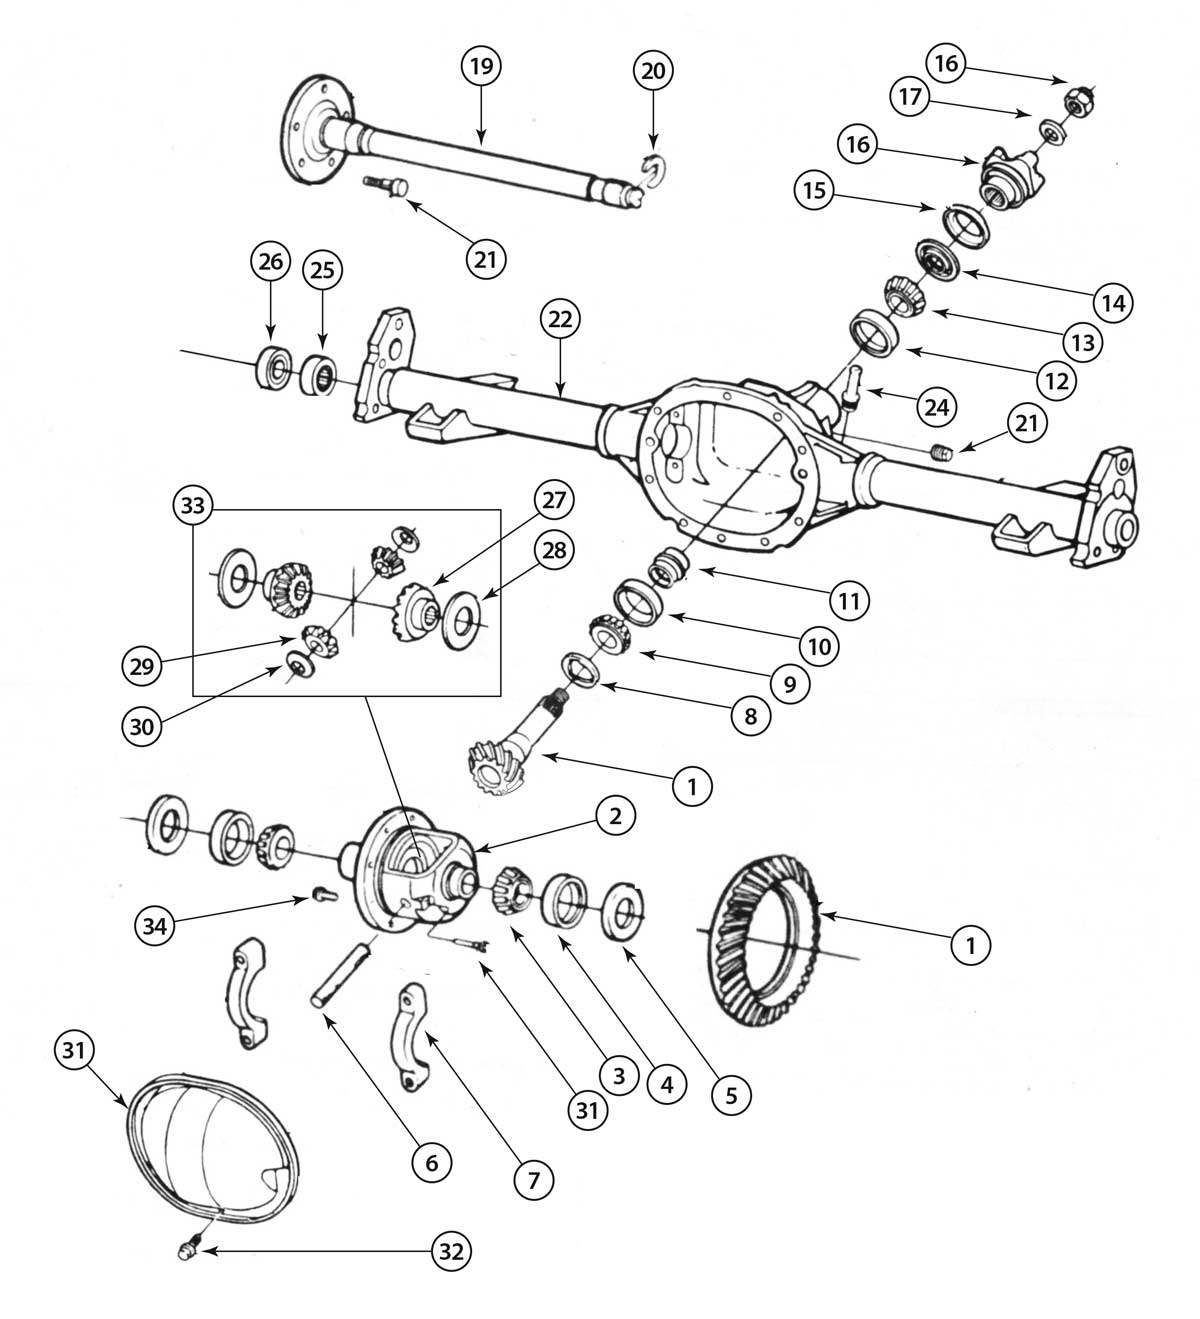 Rear Axle Exploded View - Generic Parts Diagram